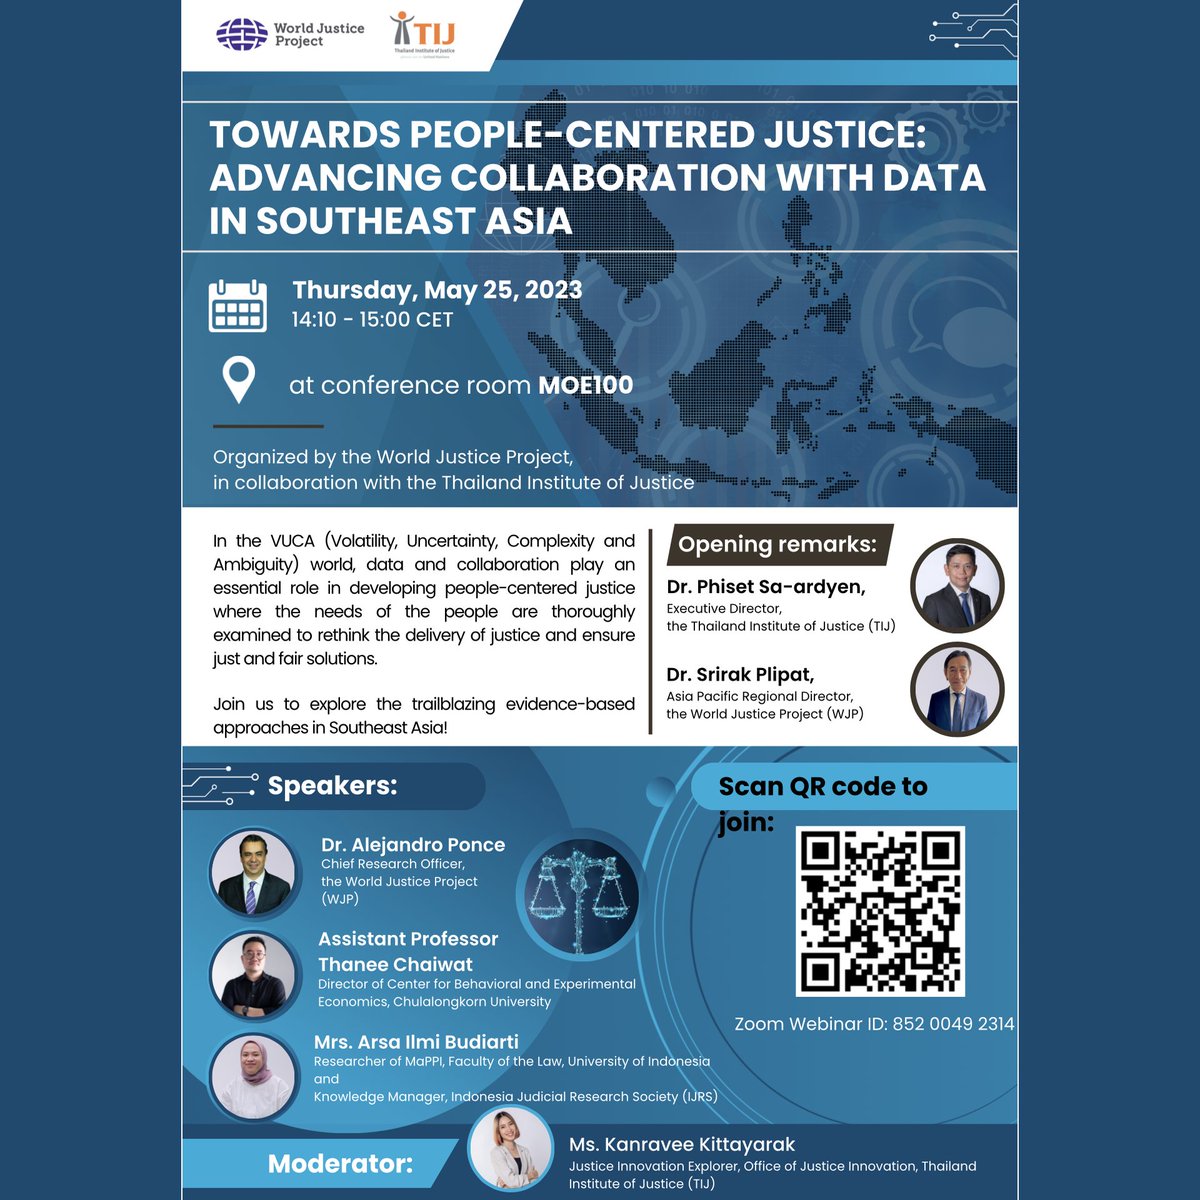 Scan the QR code below and join us and the Thailand Institute of Justice (@TIJthailand) at 8:10AM EDT/7:10PM in Jakarta for a discussion on how data & collaboration can be used to advance people-centered justice.